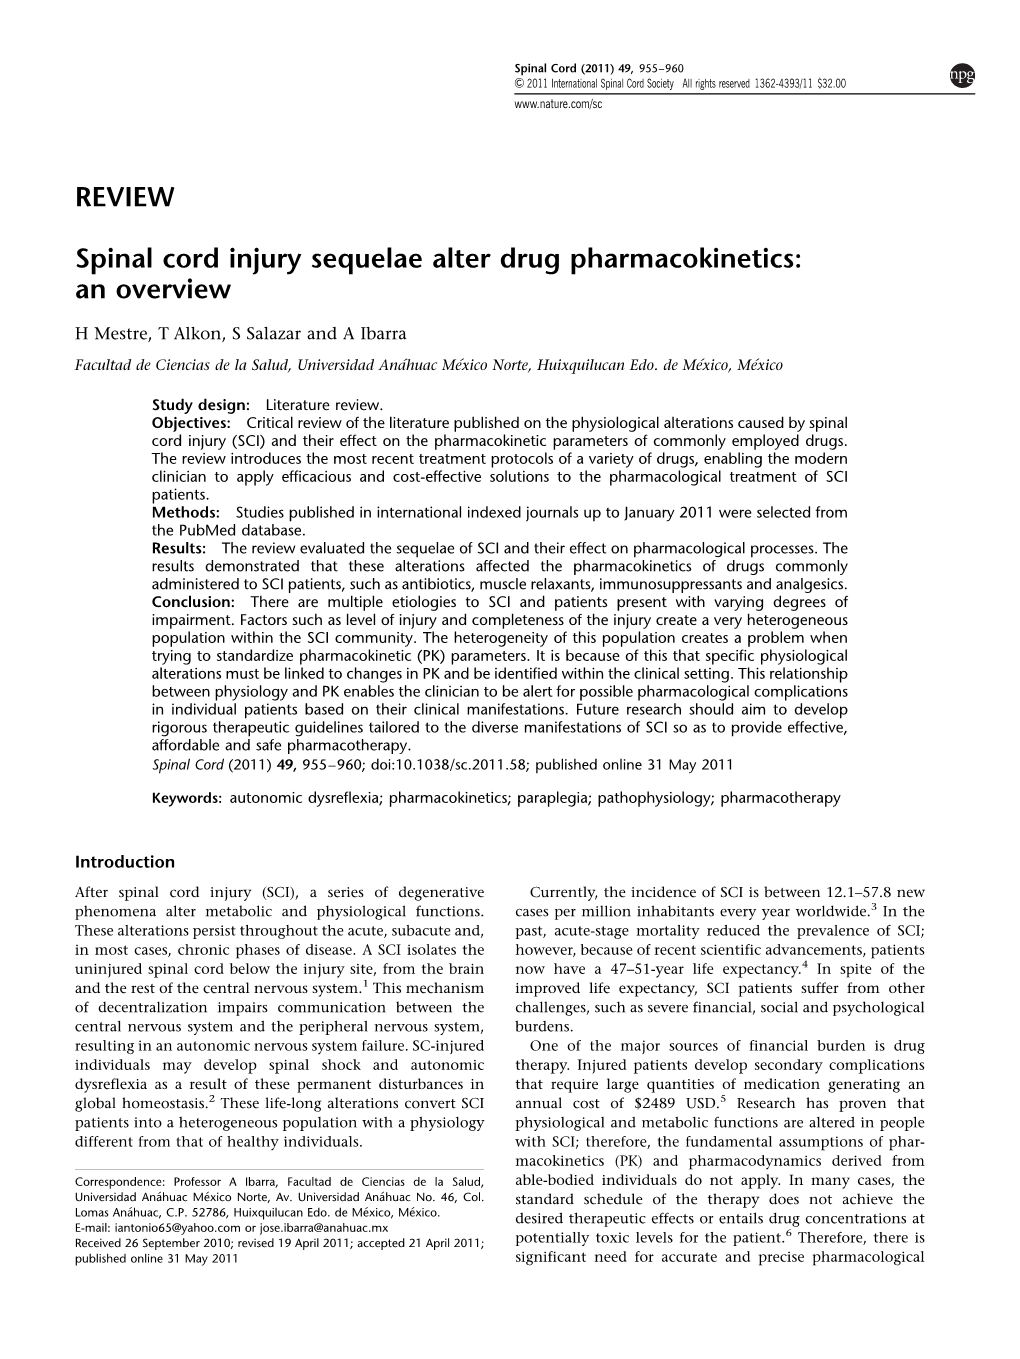 Spinal Cord Injury Sequelae Alter Drug Pharmacokinetics: an Overview